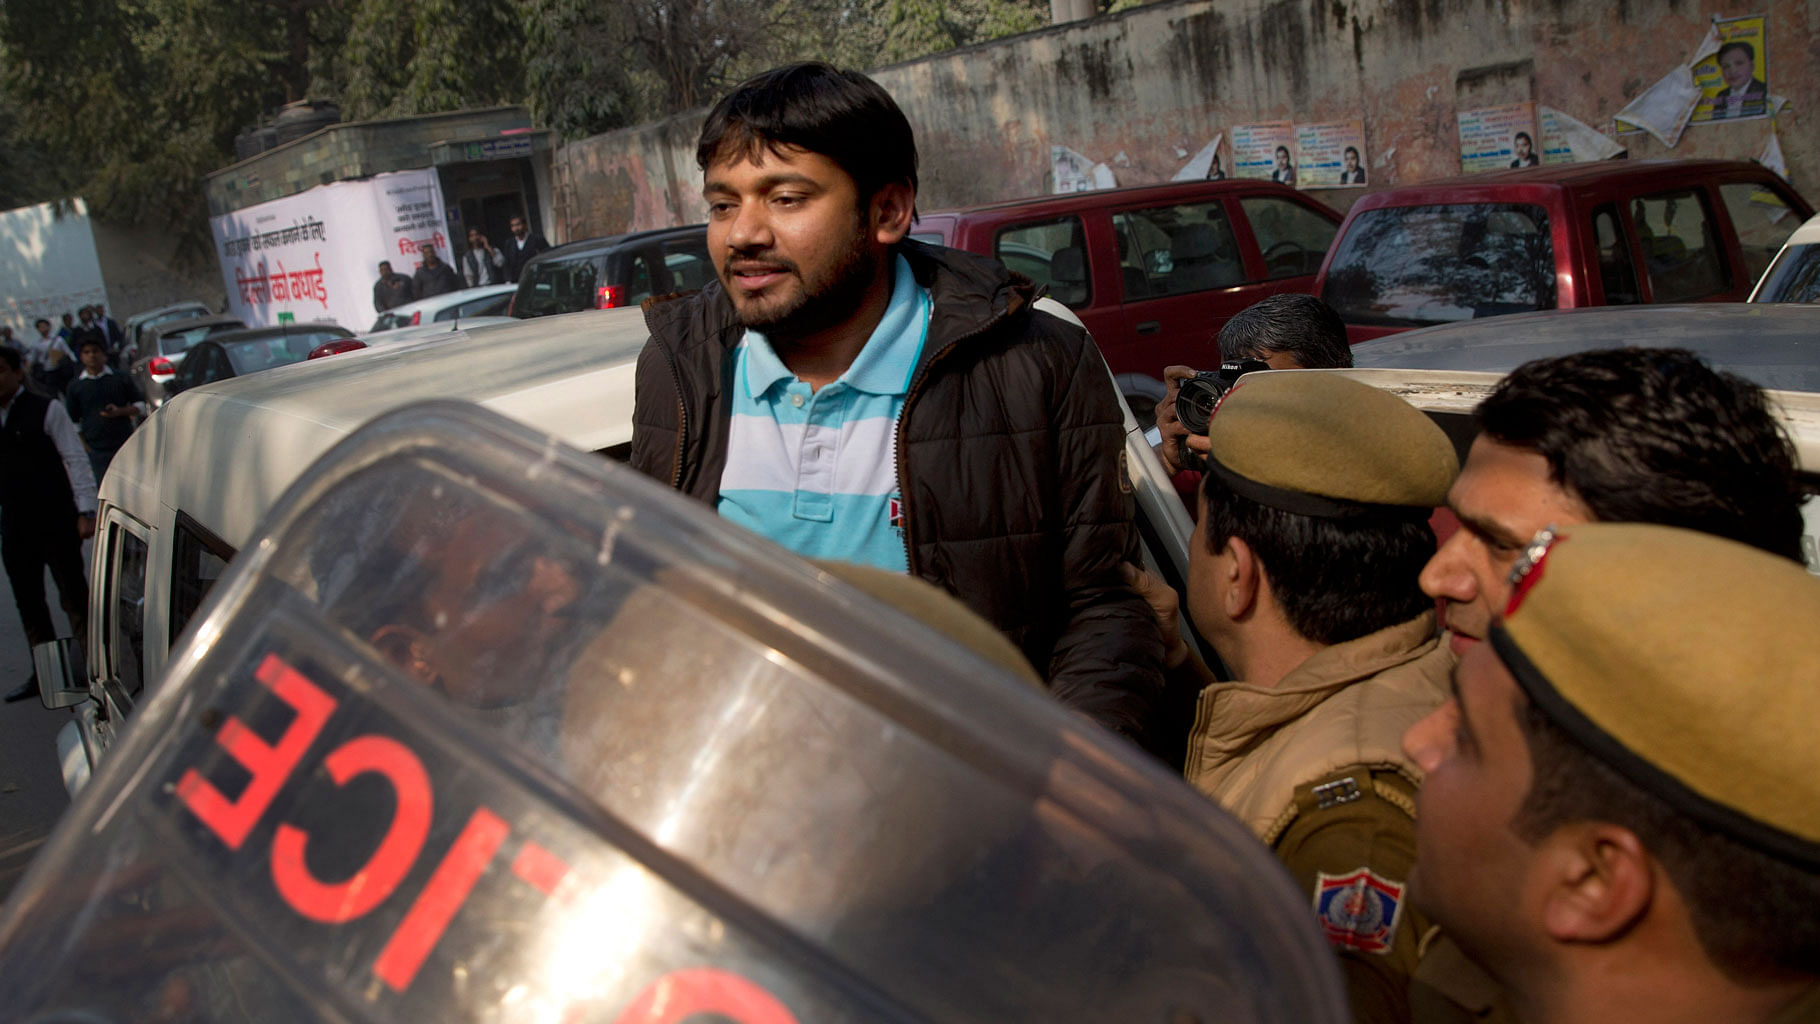 Kanhaiya Kumar, the president of the students’ union at the country’s premier Jawaharlal Nehru University is produced at a Delhi court on Wednesday, Feb. 17, 2016. (Photo: AP)